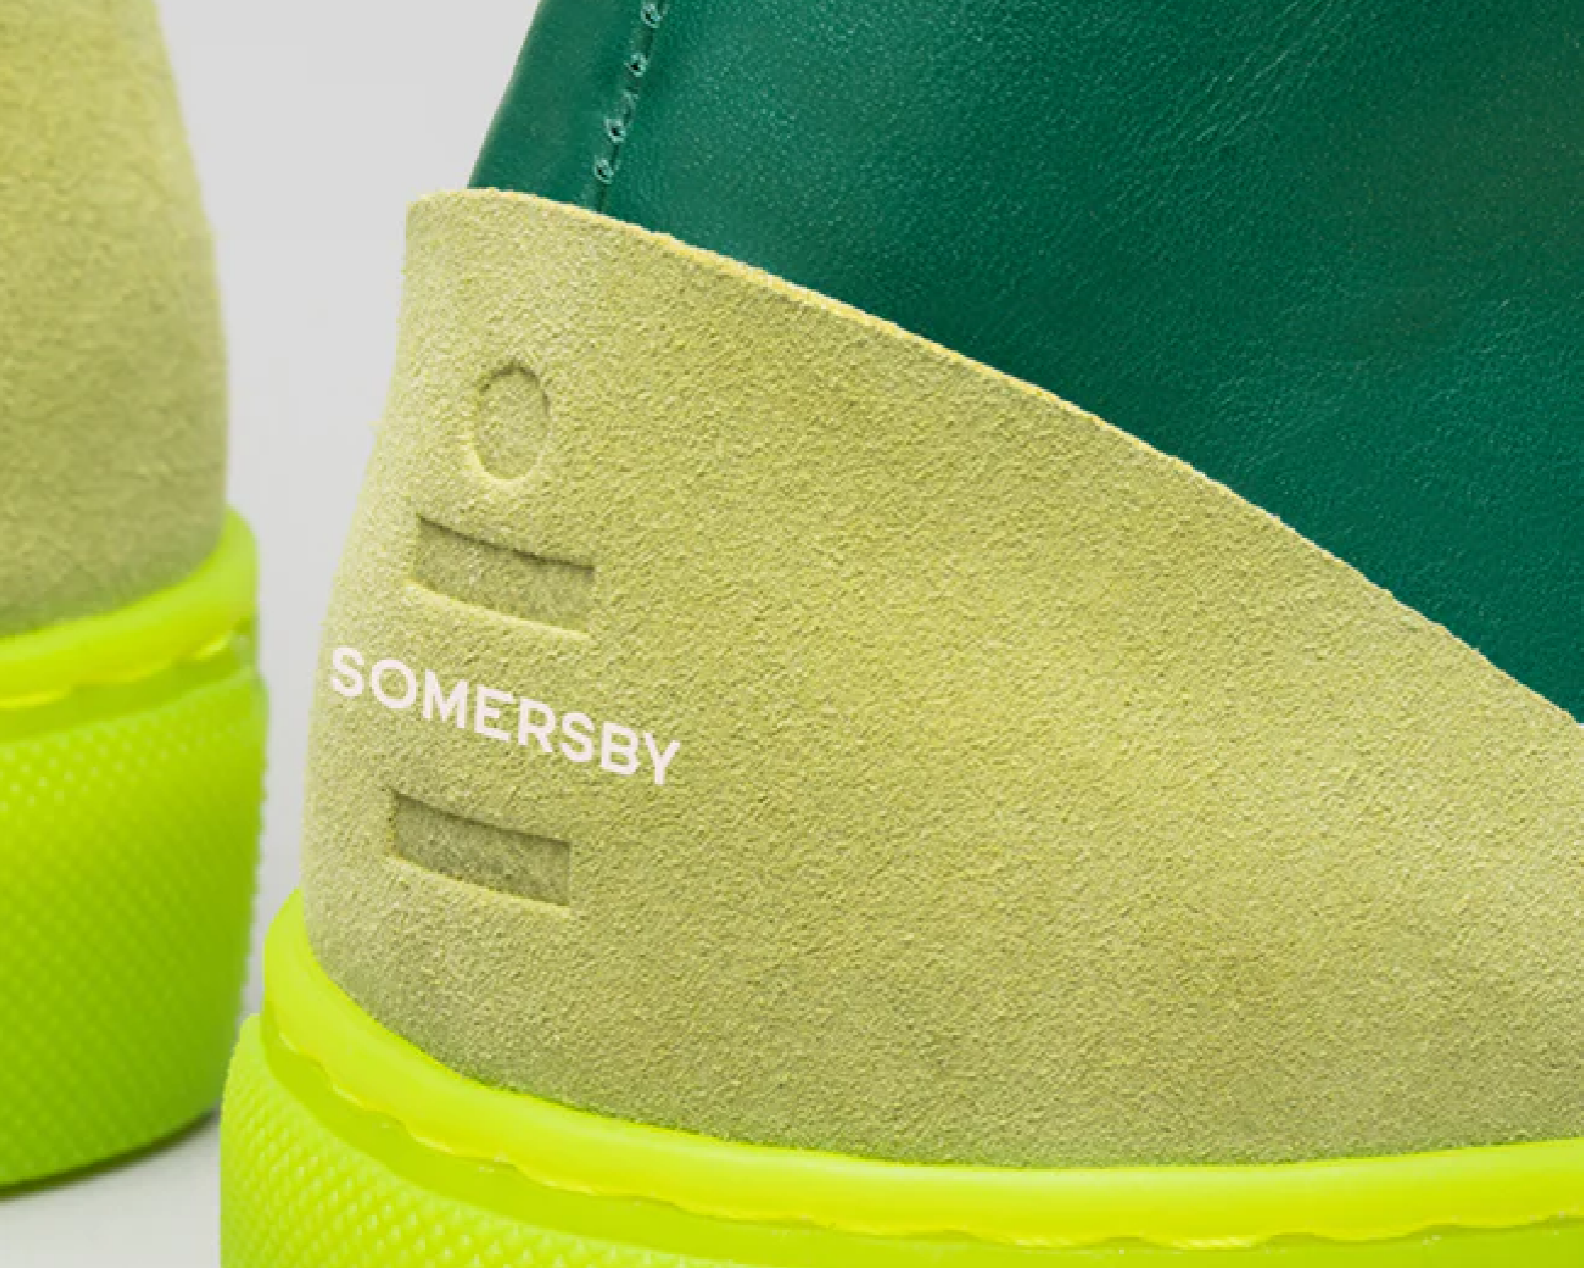 Somersby has made it into our feet